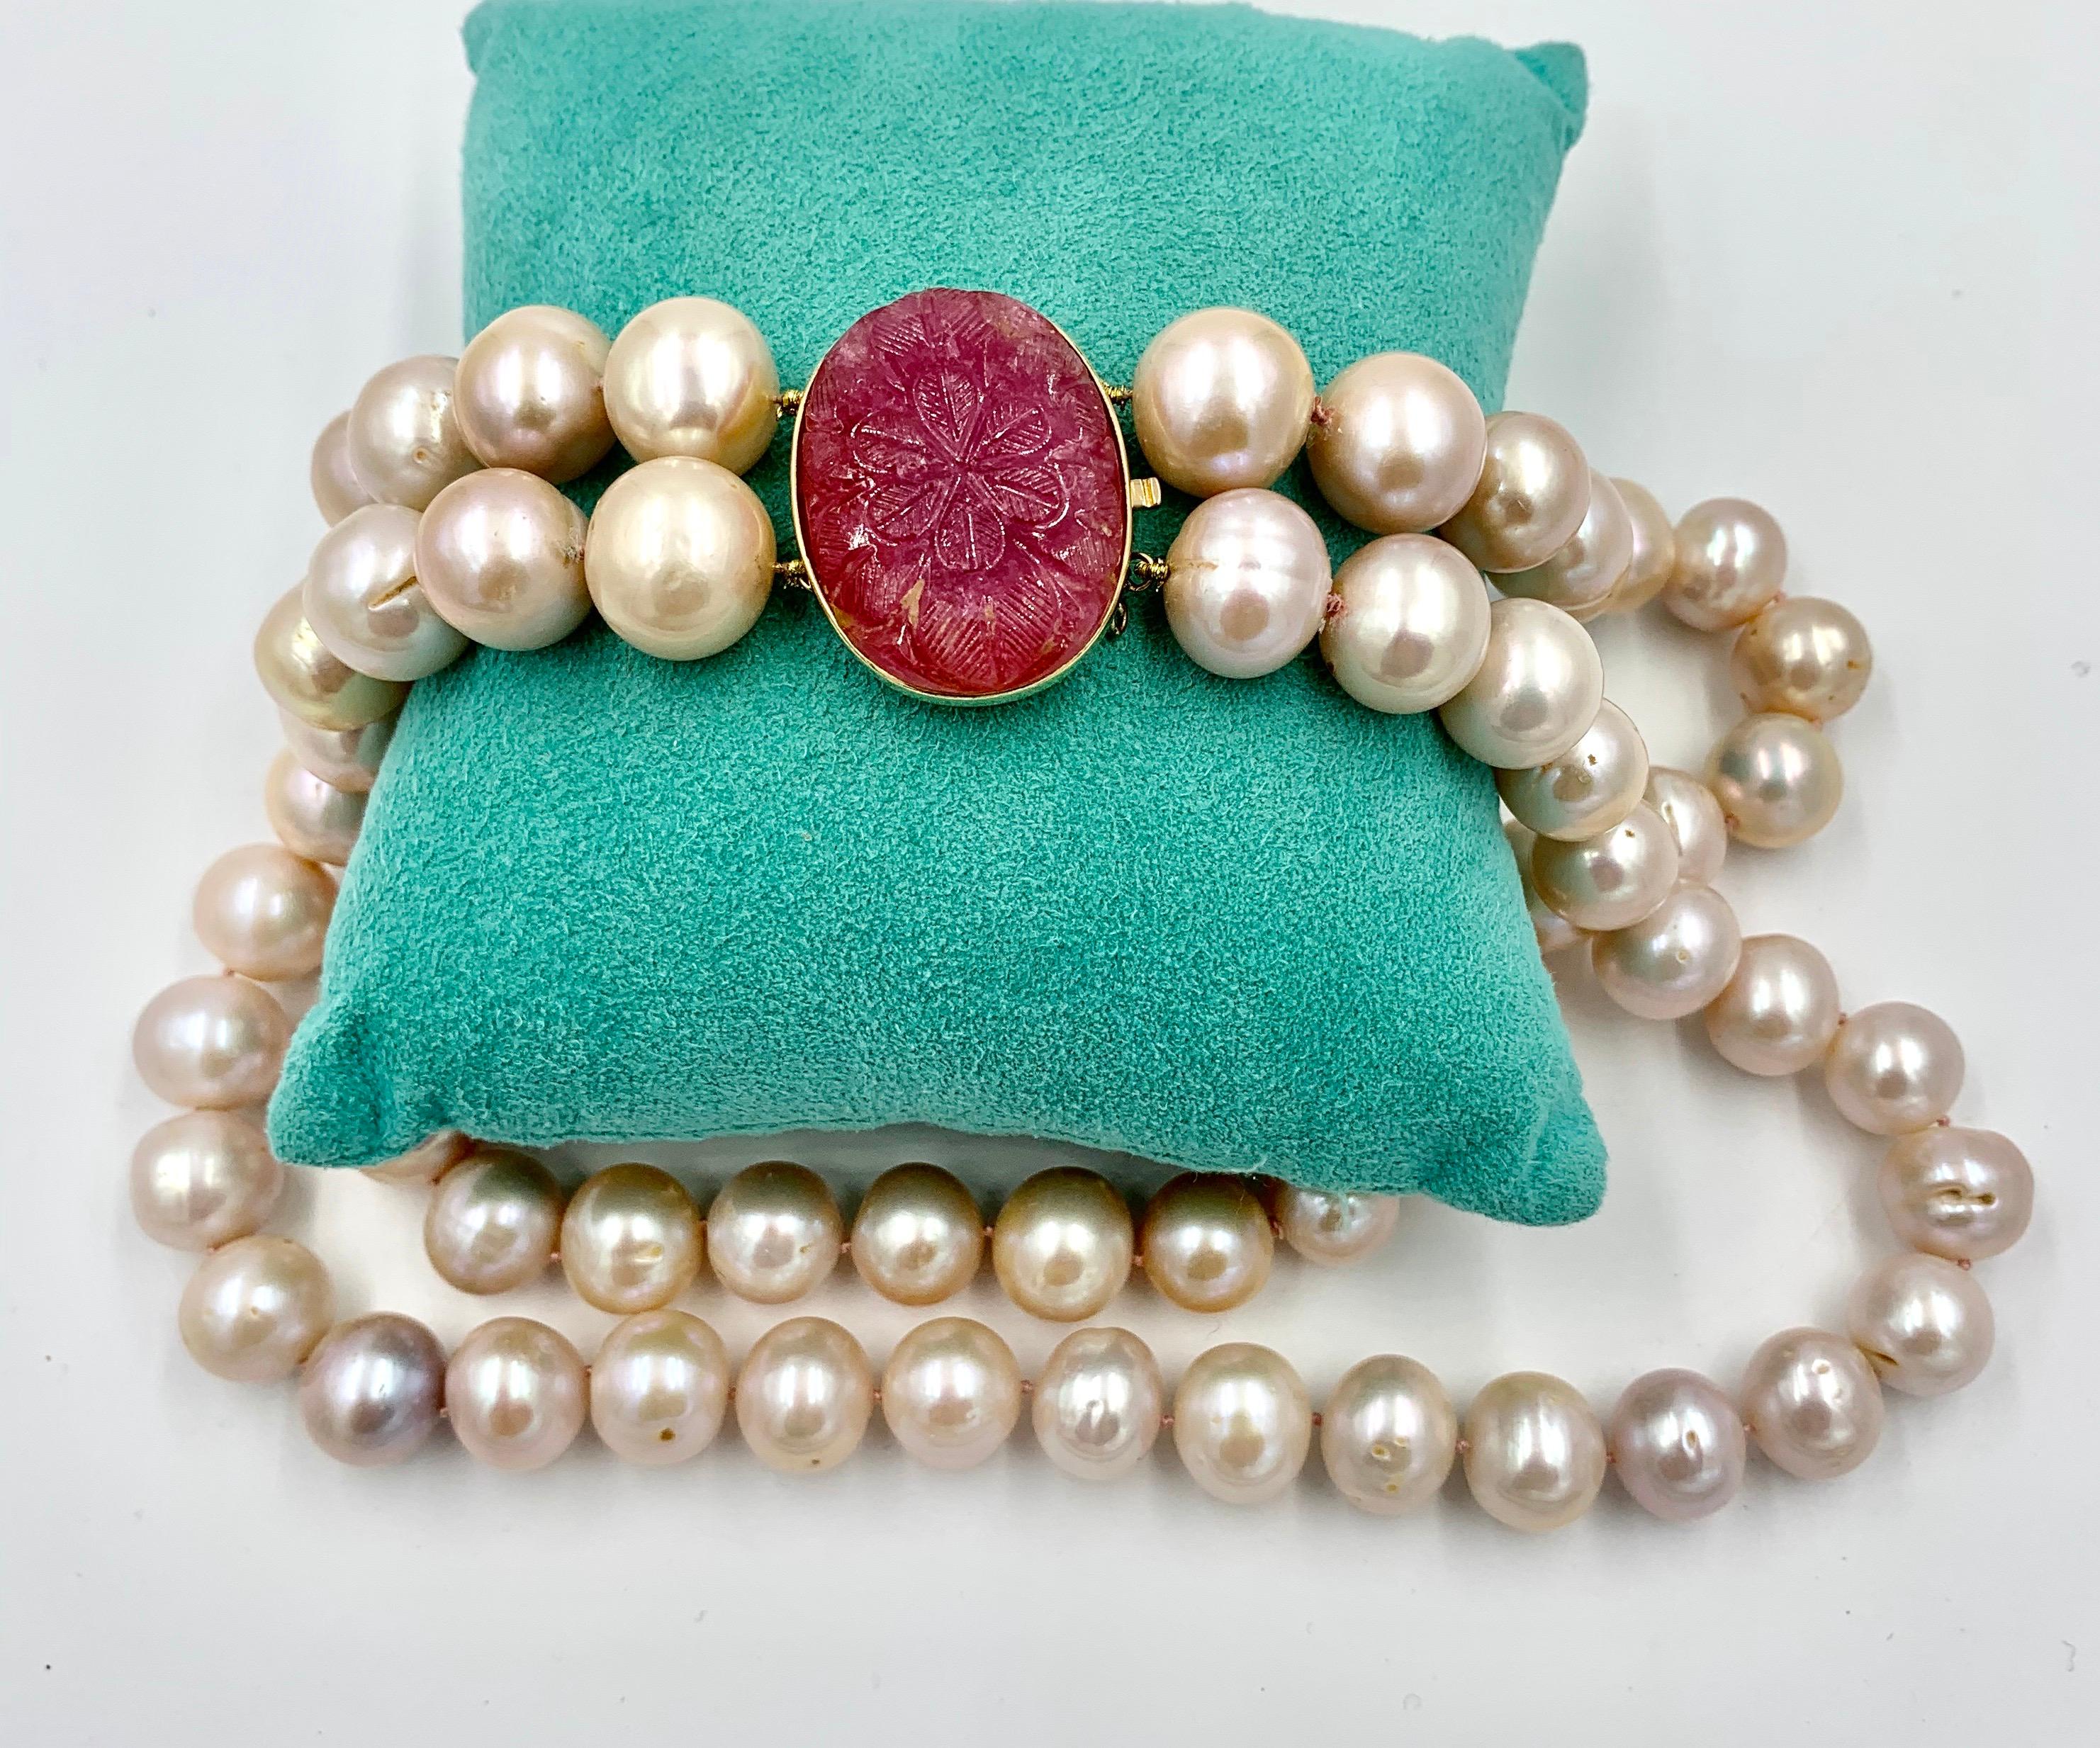 AN EXTRAORDINARY NECKLACE FROM THE ESTATE OF JANINE METZ, THE SOCIAL SECRETARY TO THE DUCHESS OF WINDSOR.  THE NECKLACE IS A 16 INCH DOUBLE STRAND OF PINK FRESHWATER PEARLS WHICH RANGE IN SIZE FROM 14.1MM TO 12.5MM.  THE CLASP IS A GORGEOUS CARVED